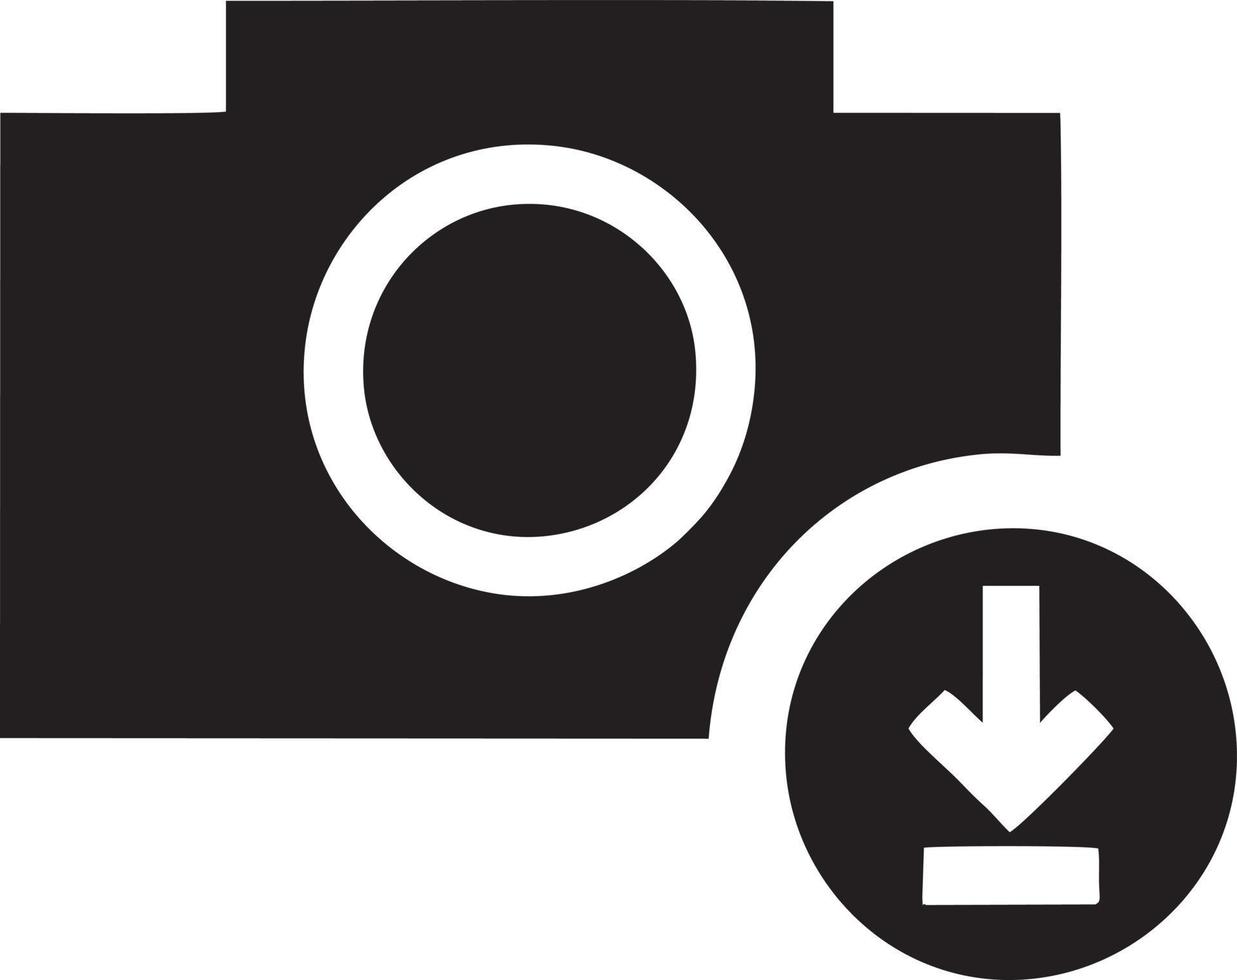 Download icon symbol image vector. Illustration of the down load design. EPS 10 vector